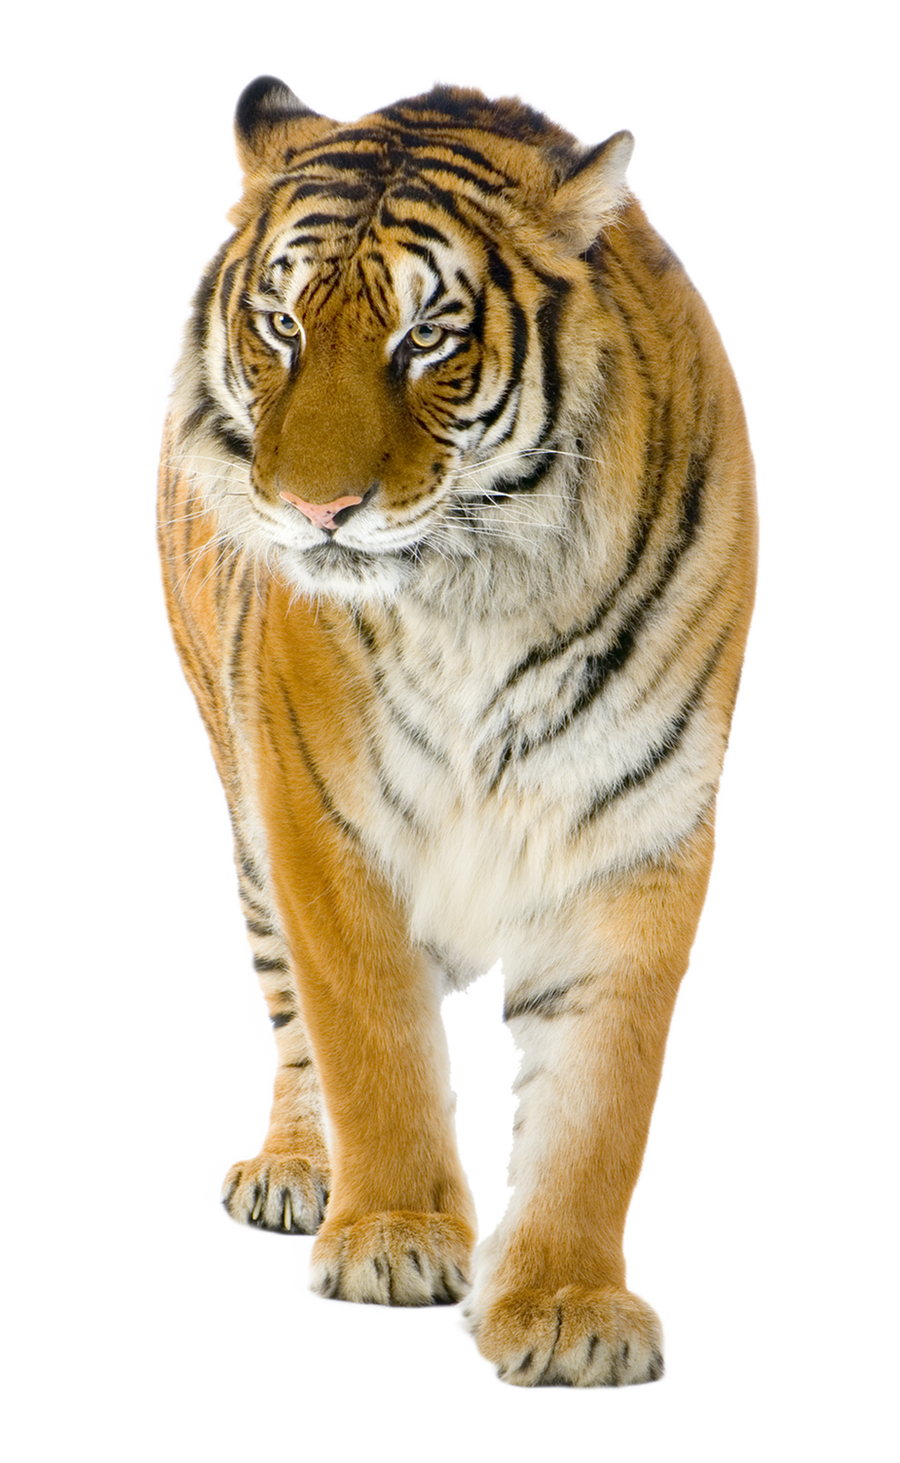 Tiger on a transparent background. by PRUSSIAART on DeviantArt